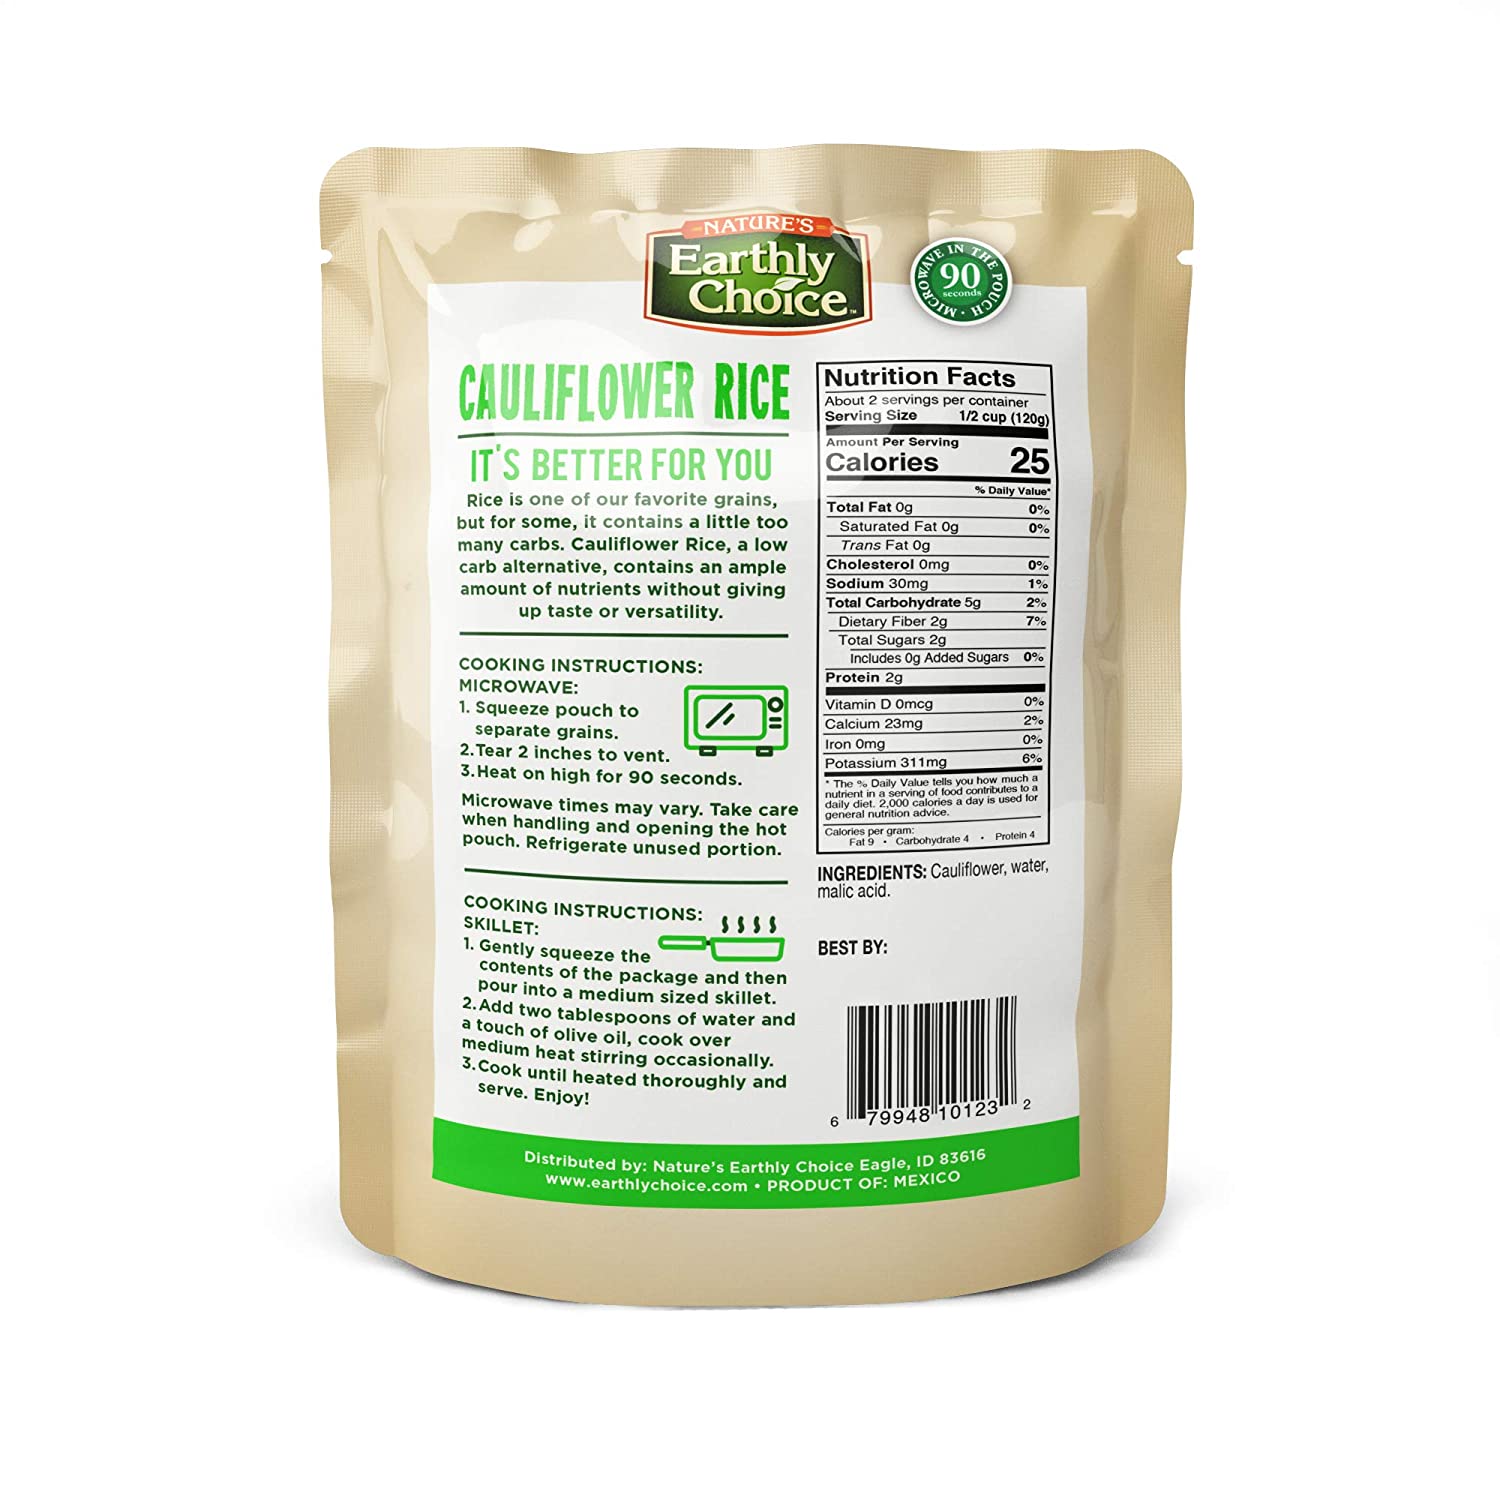 Nature's Earthly Choice Cauliflower Rice 8.5 oz - High-quality Vegetarian/Vegan by Nature's Earthly Choice at 